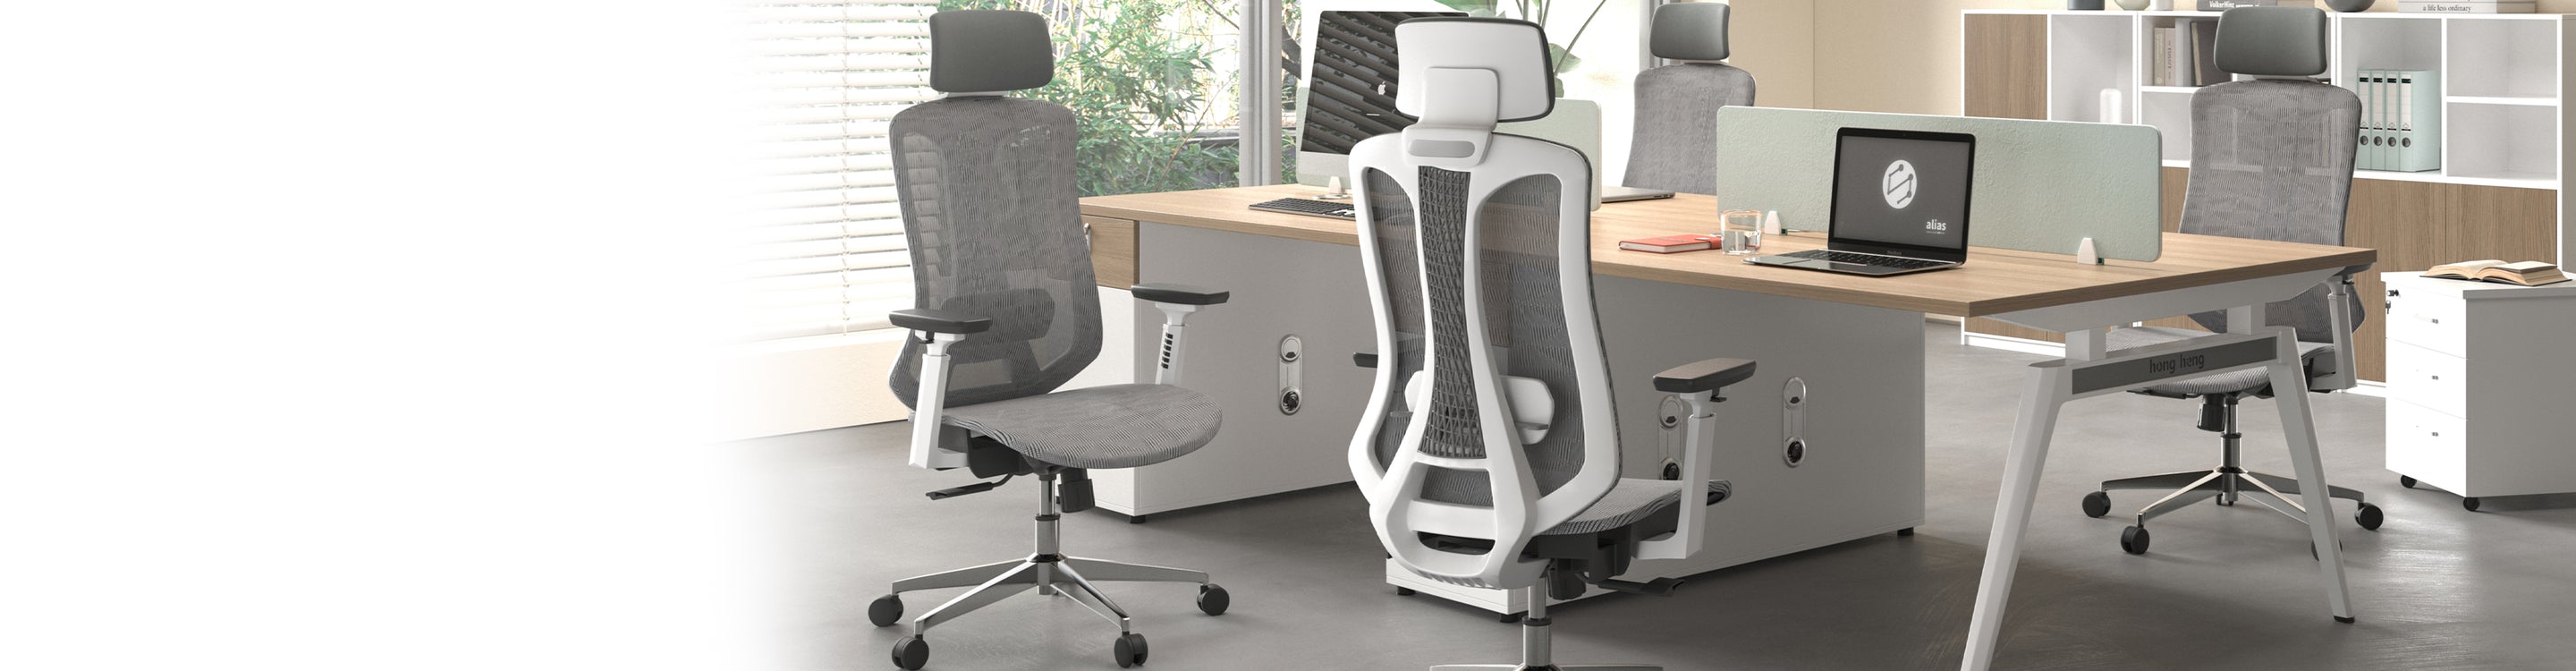 4 white back with grey mesh office chairs, with a meeting desk, 2 computers on the desk